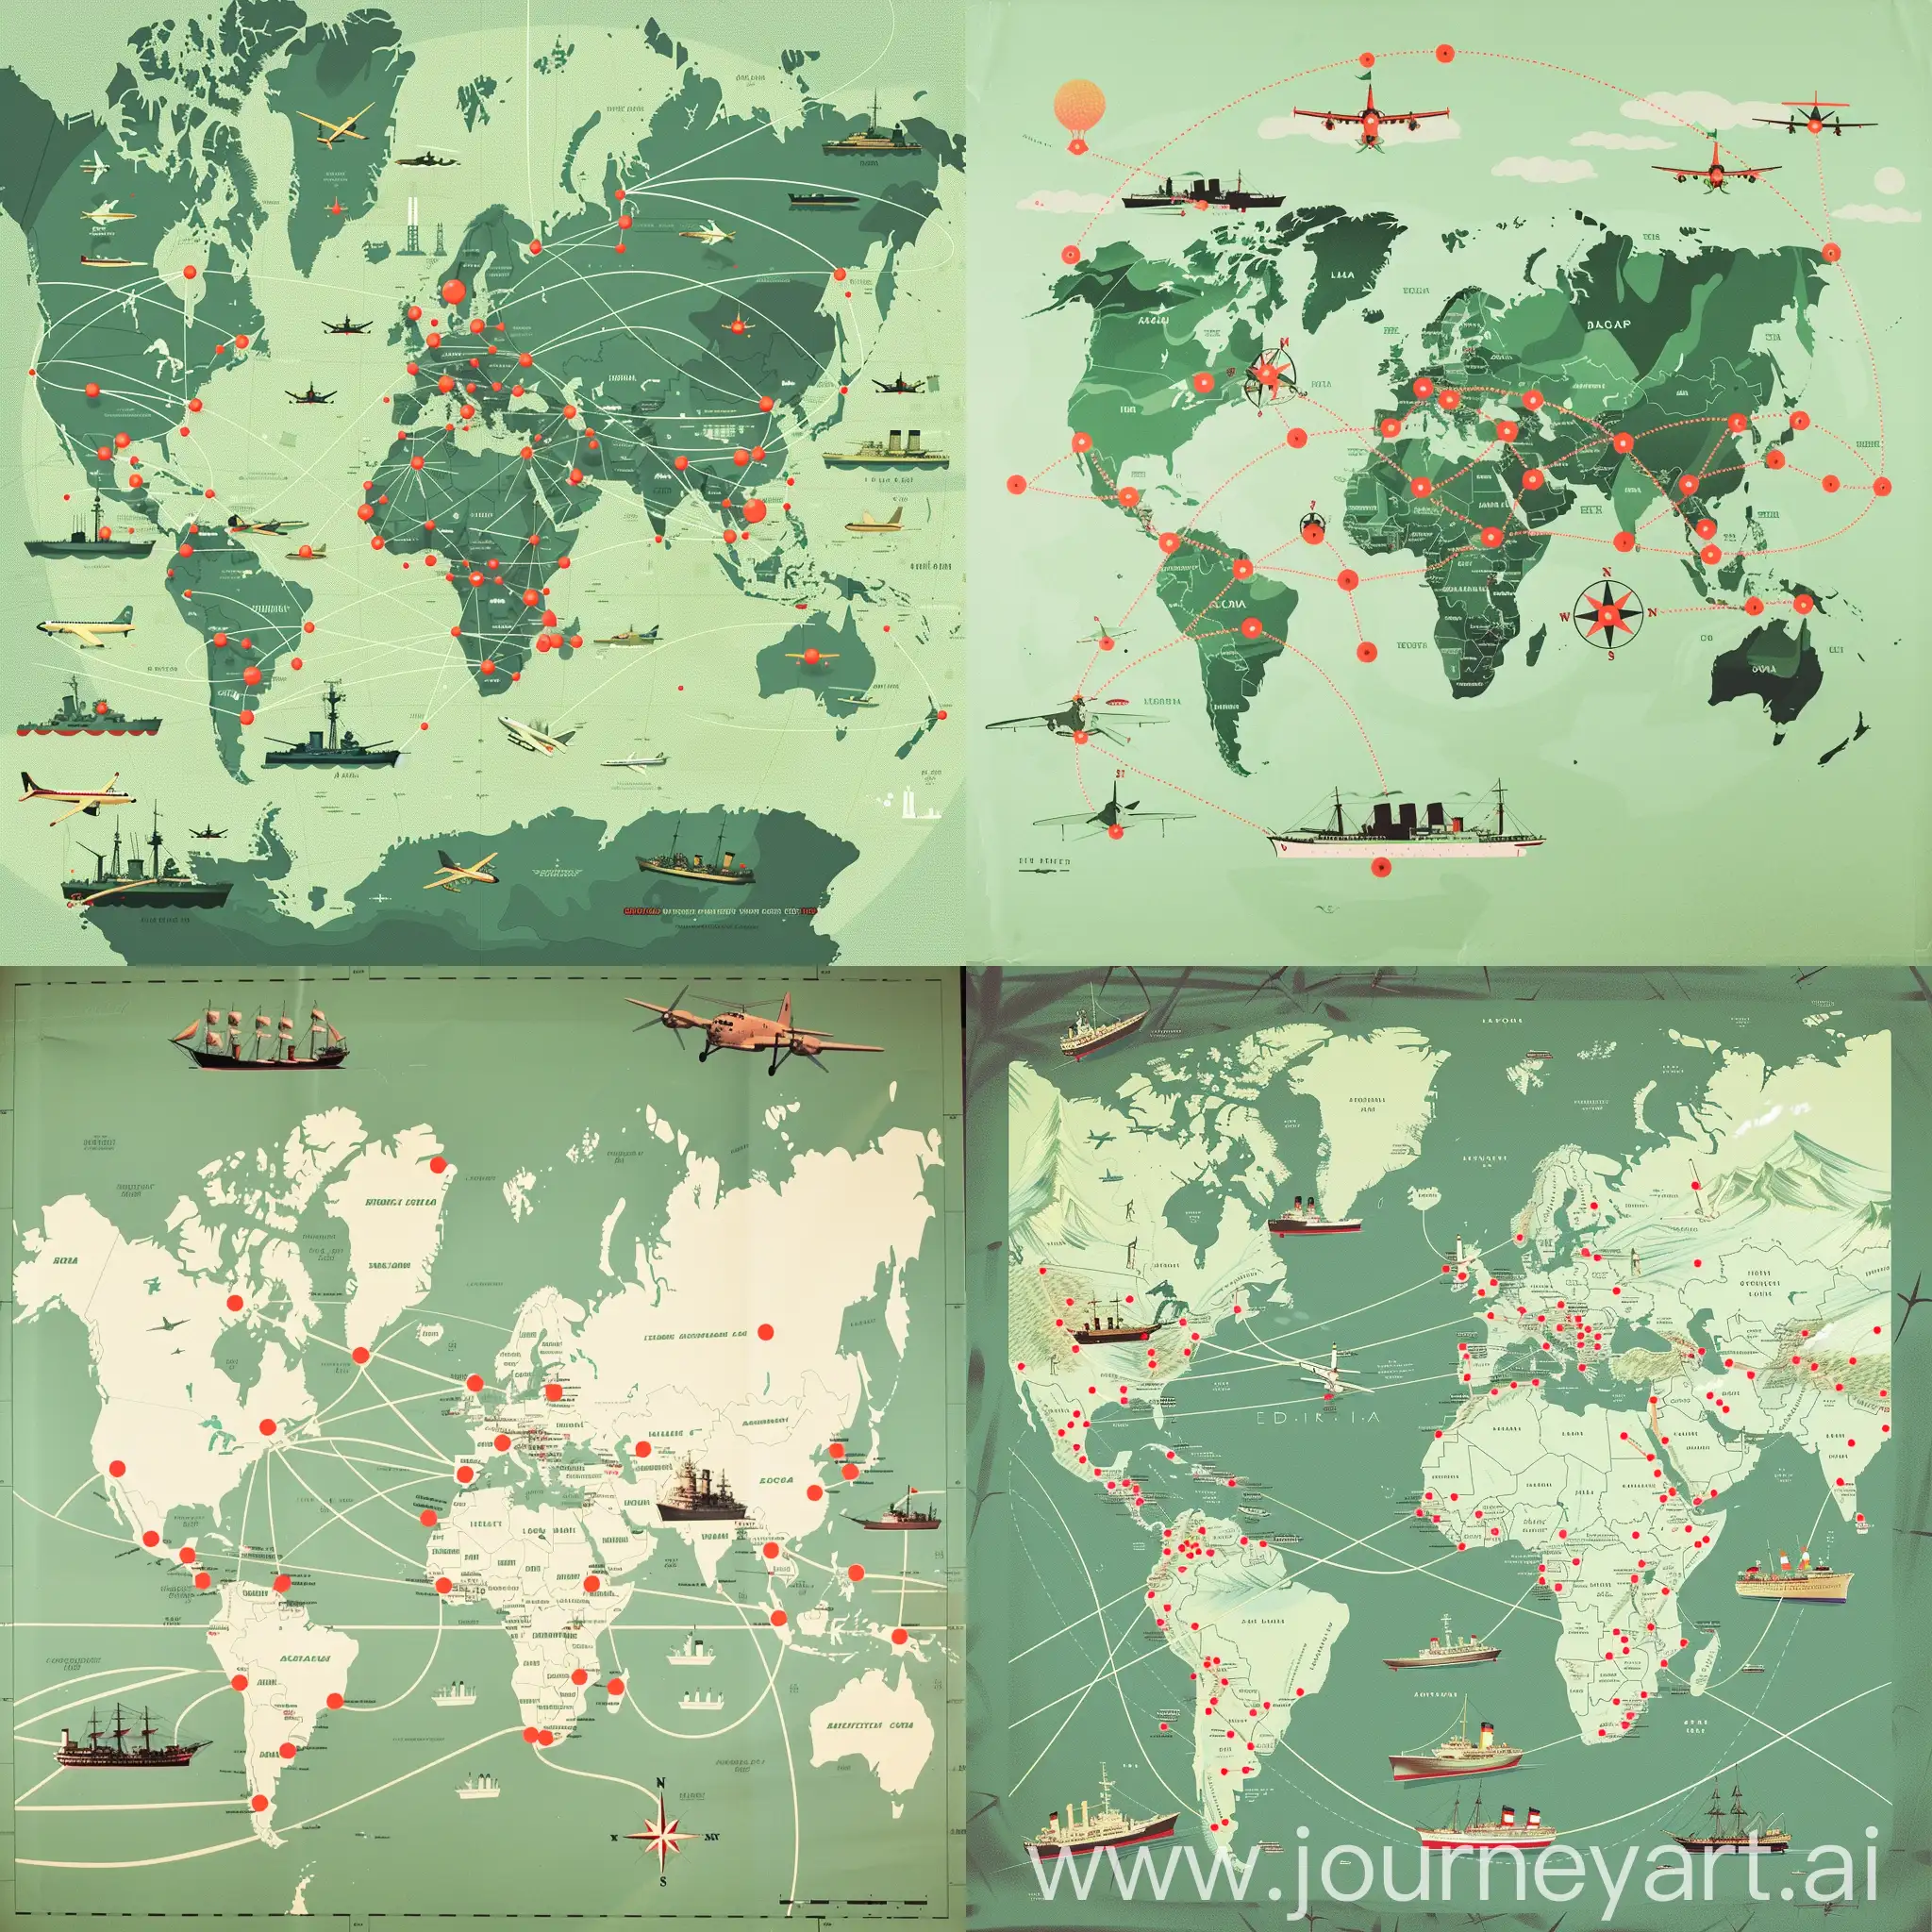 Global-Transportation-Network-Earth-Map-with-Ships-Planes-and-Capitals